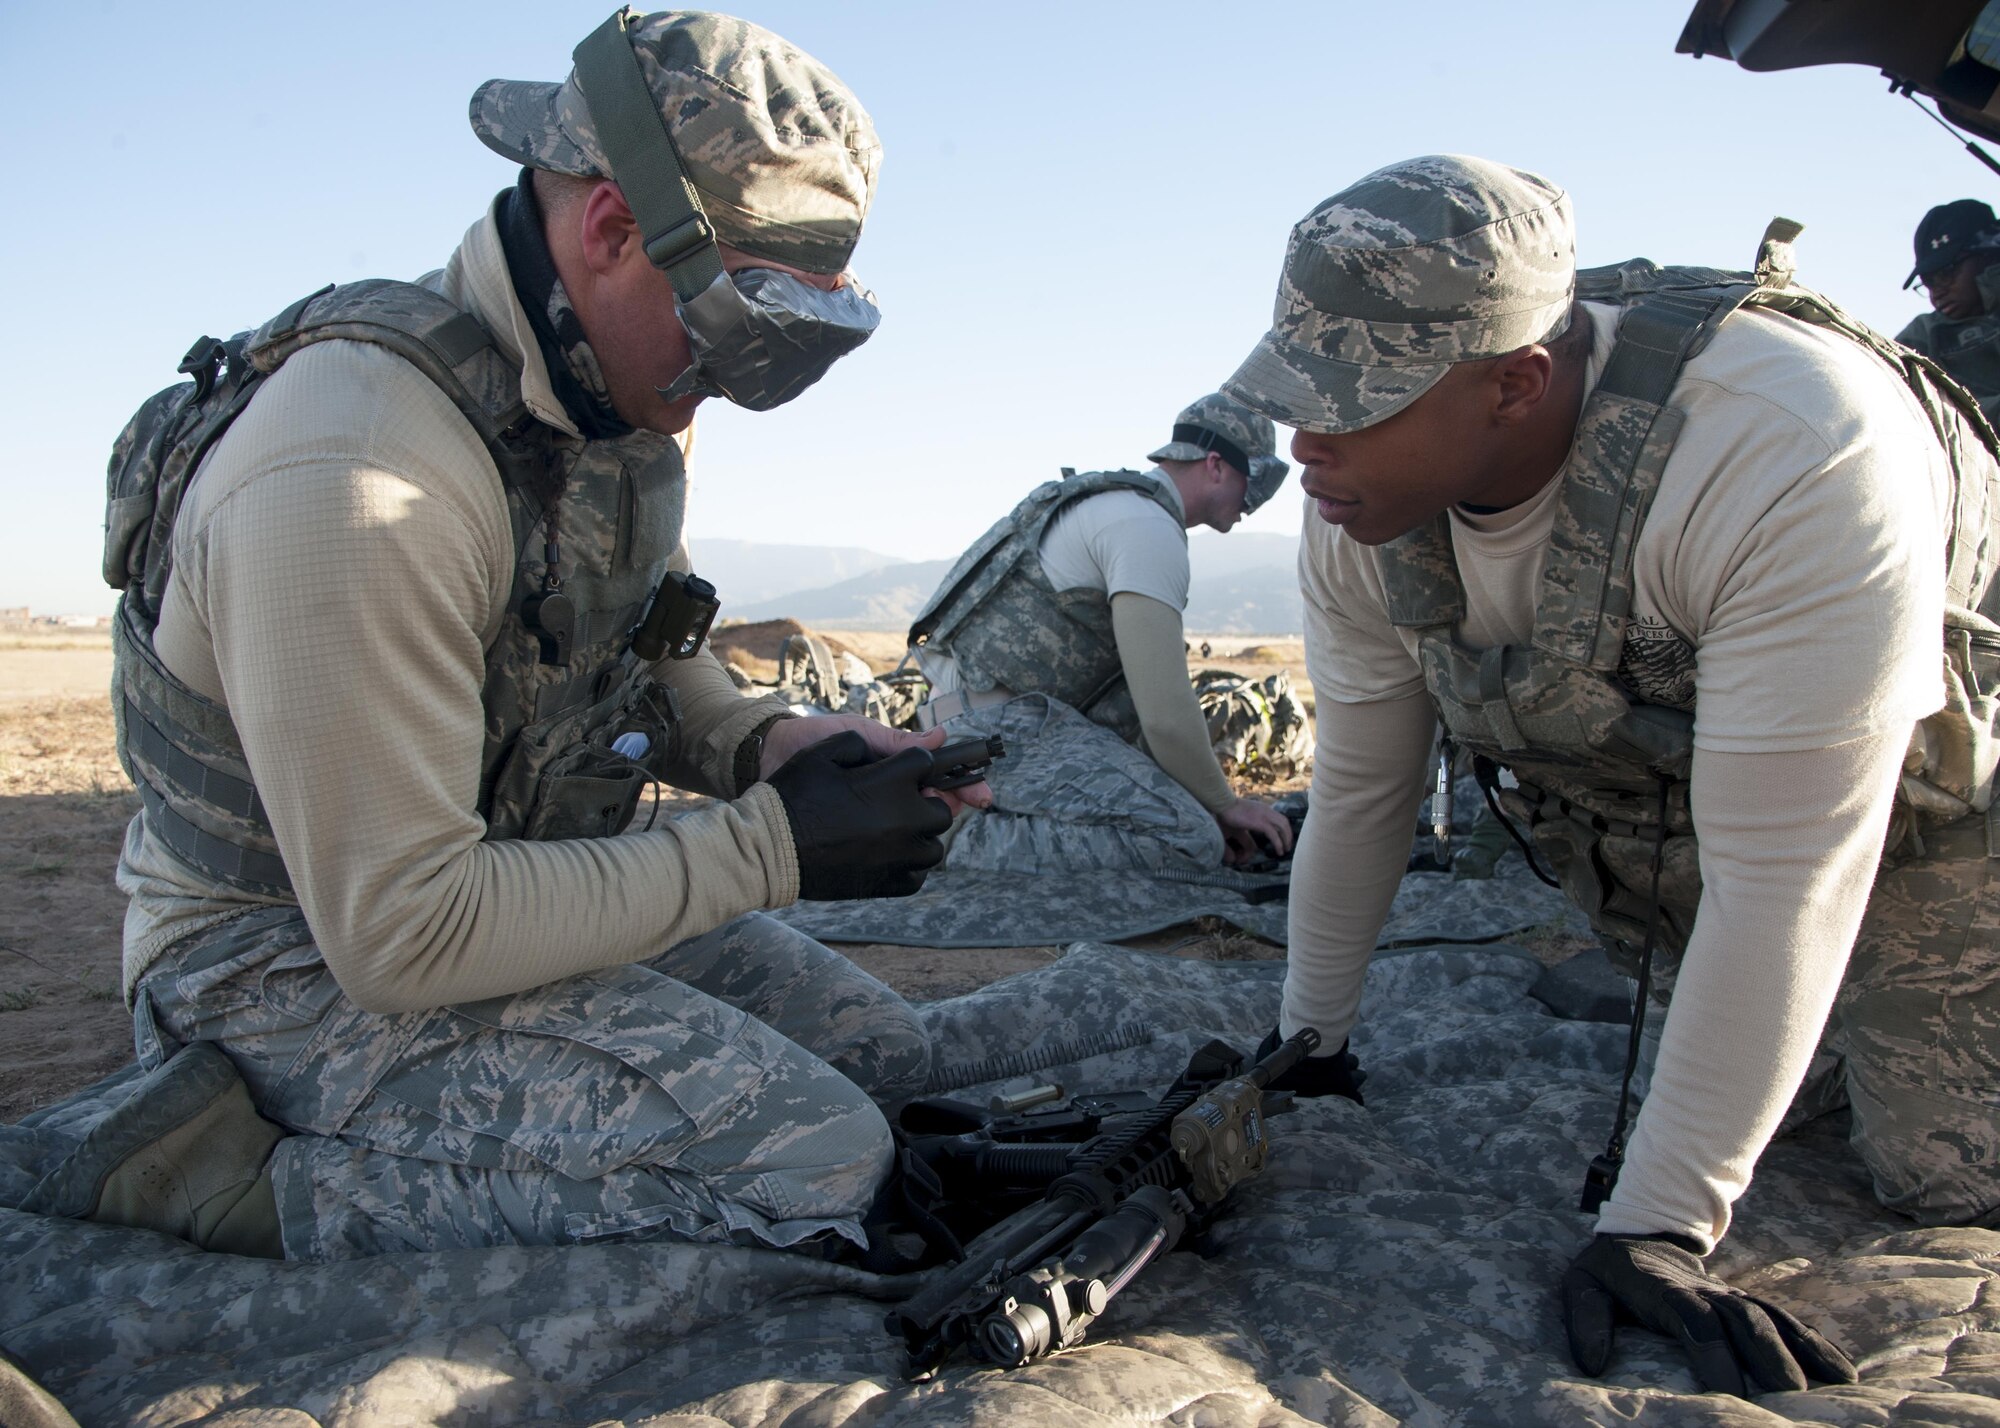 Staff Sgt. Raymond Thompkins, 377th Weapons Systems Security Squadron, verbally assists Senior Airman James Ogg, 377th WSSS, with disassembling an M-4 during the weapons knowledge portion of the Manzano Challenge at Kirtland Air Force Base, N.M., Oct. 27. The event saw 40 Airmen from the 377th Security Forces Group competing in different stations, ranging from weapons skills and land navigation to team tactics and problem solving. (U.S. Air Force photo by Staff Sgt. J.D. Strong II)